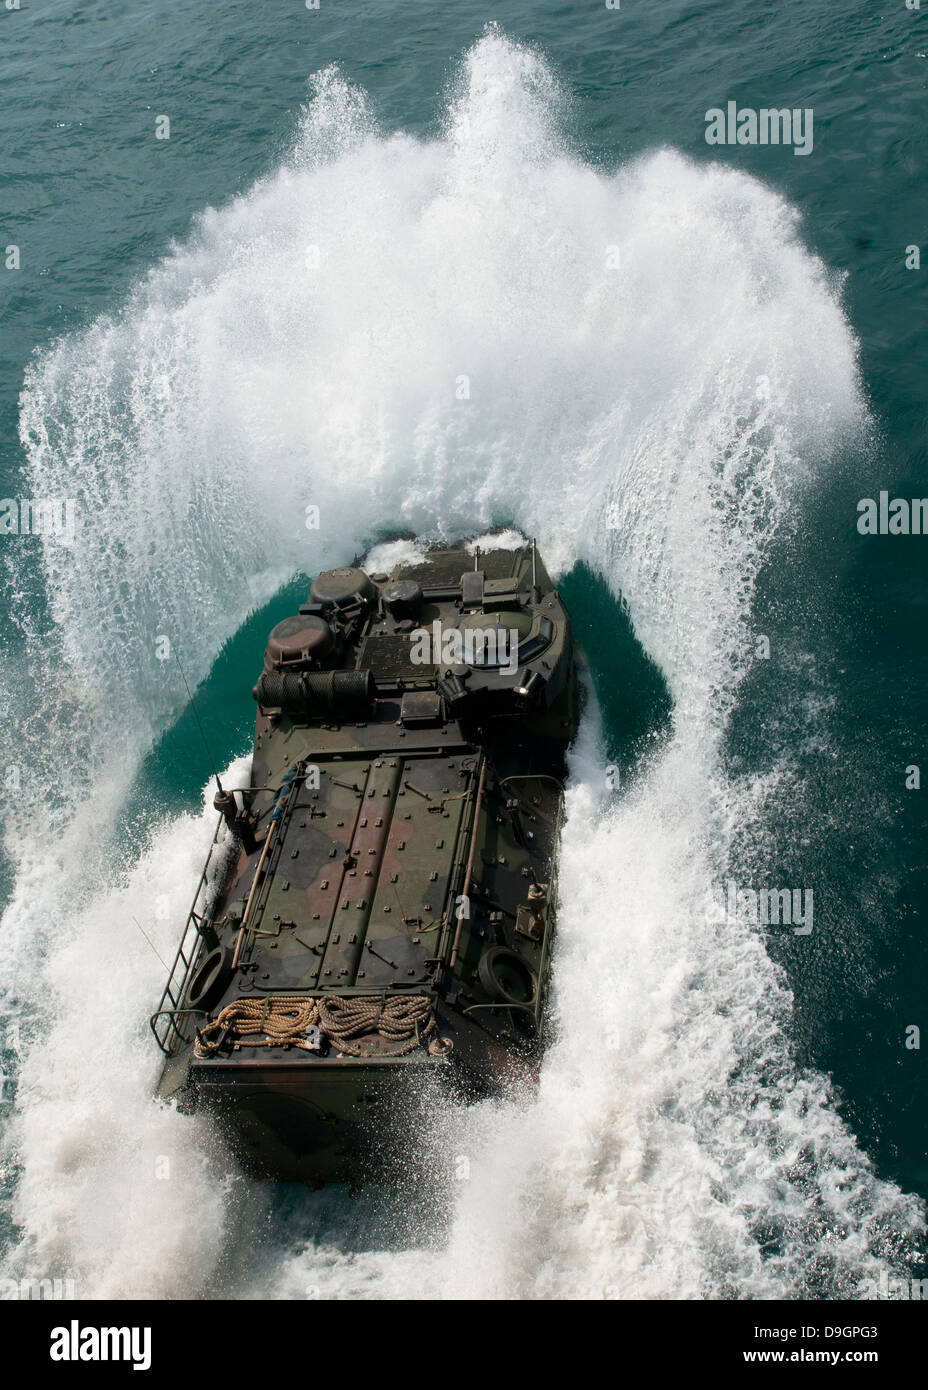 U.S. Marines drive an assault amphibious vehicle in the Pacific Ocean. Stock Photo